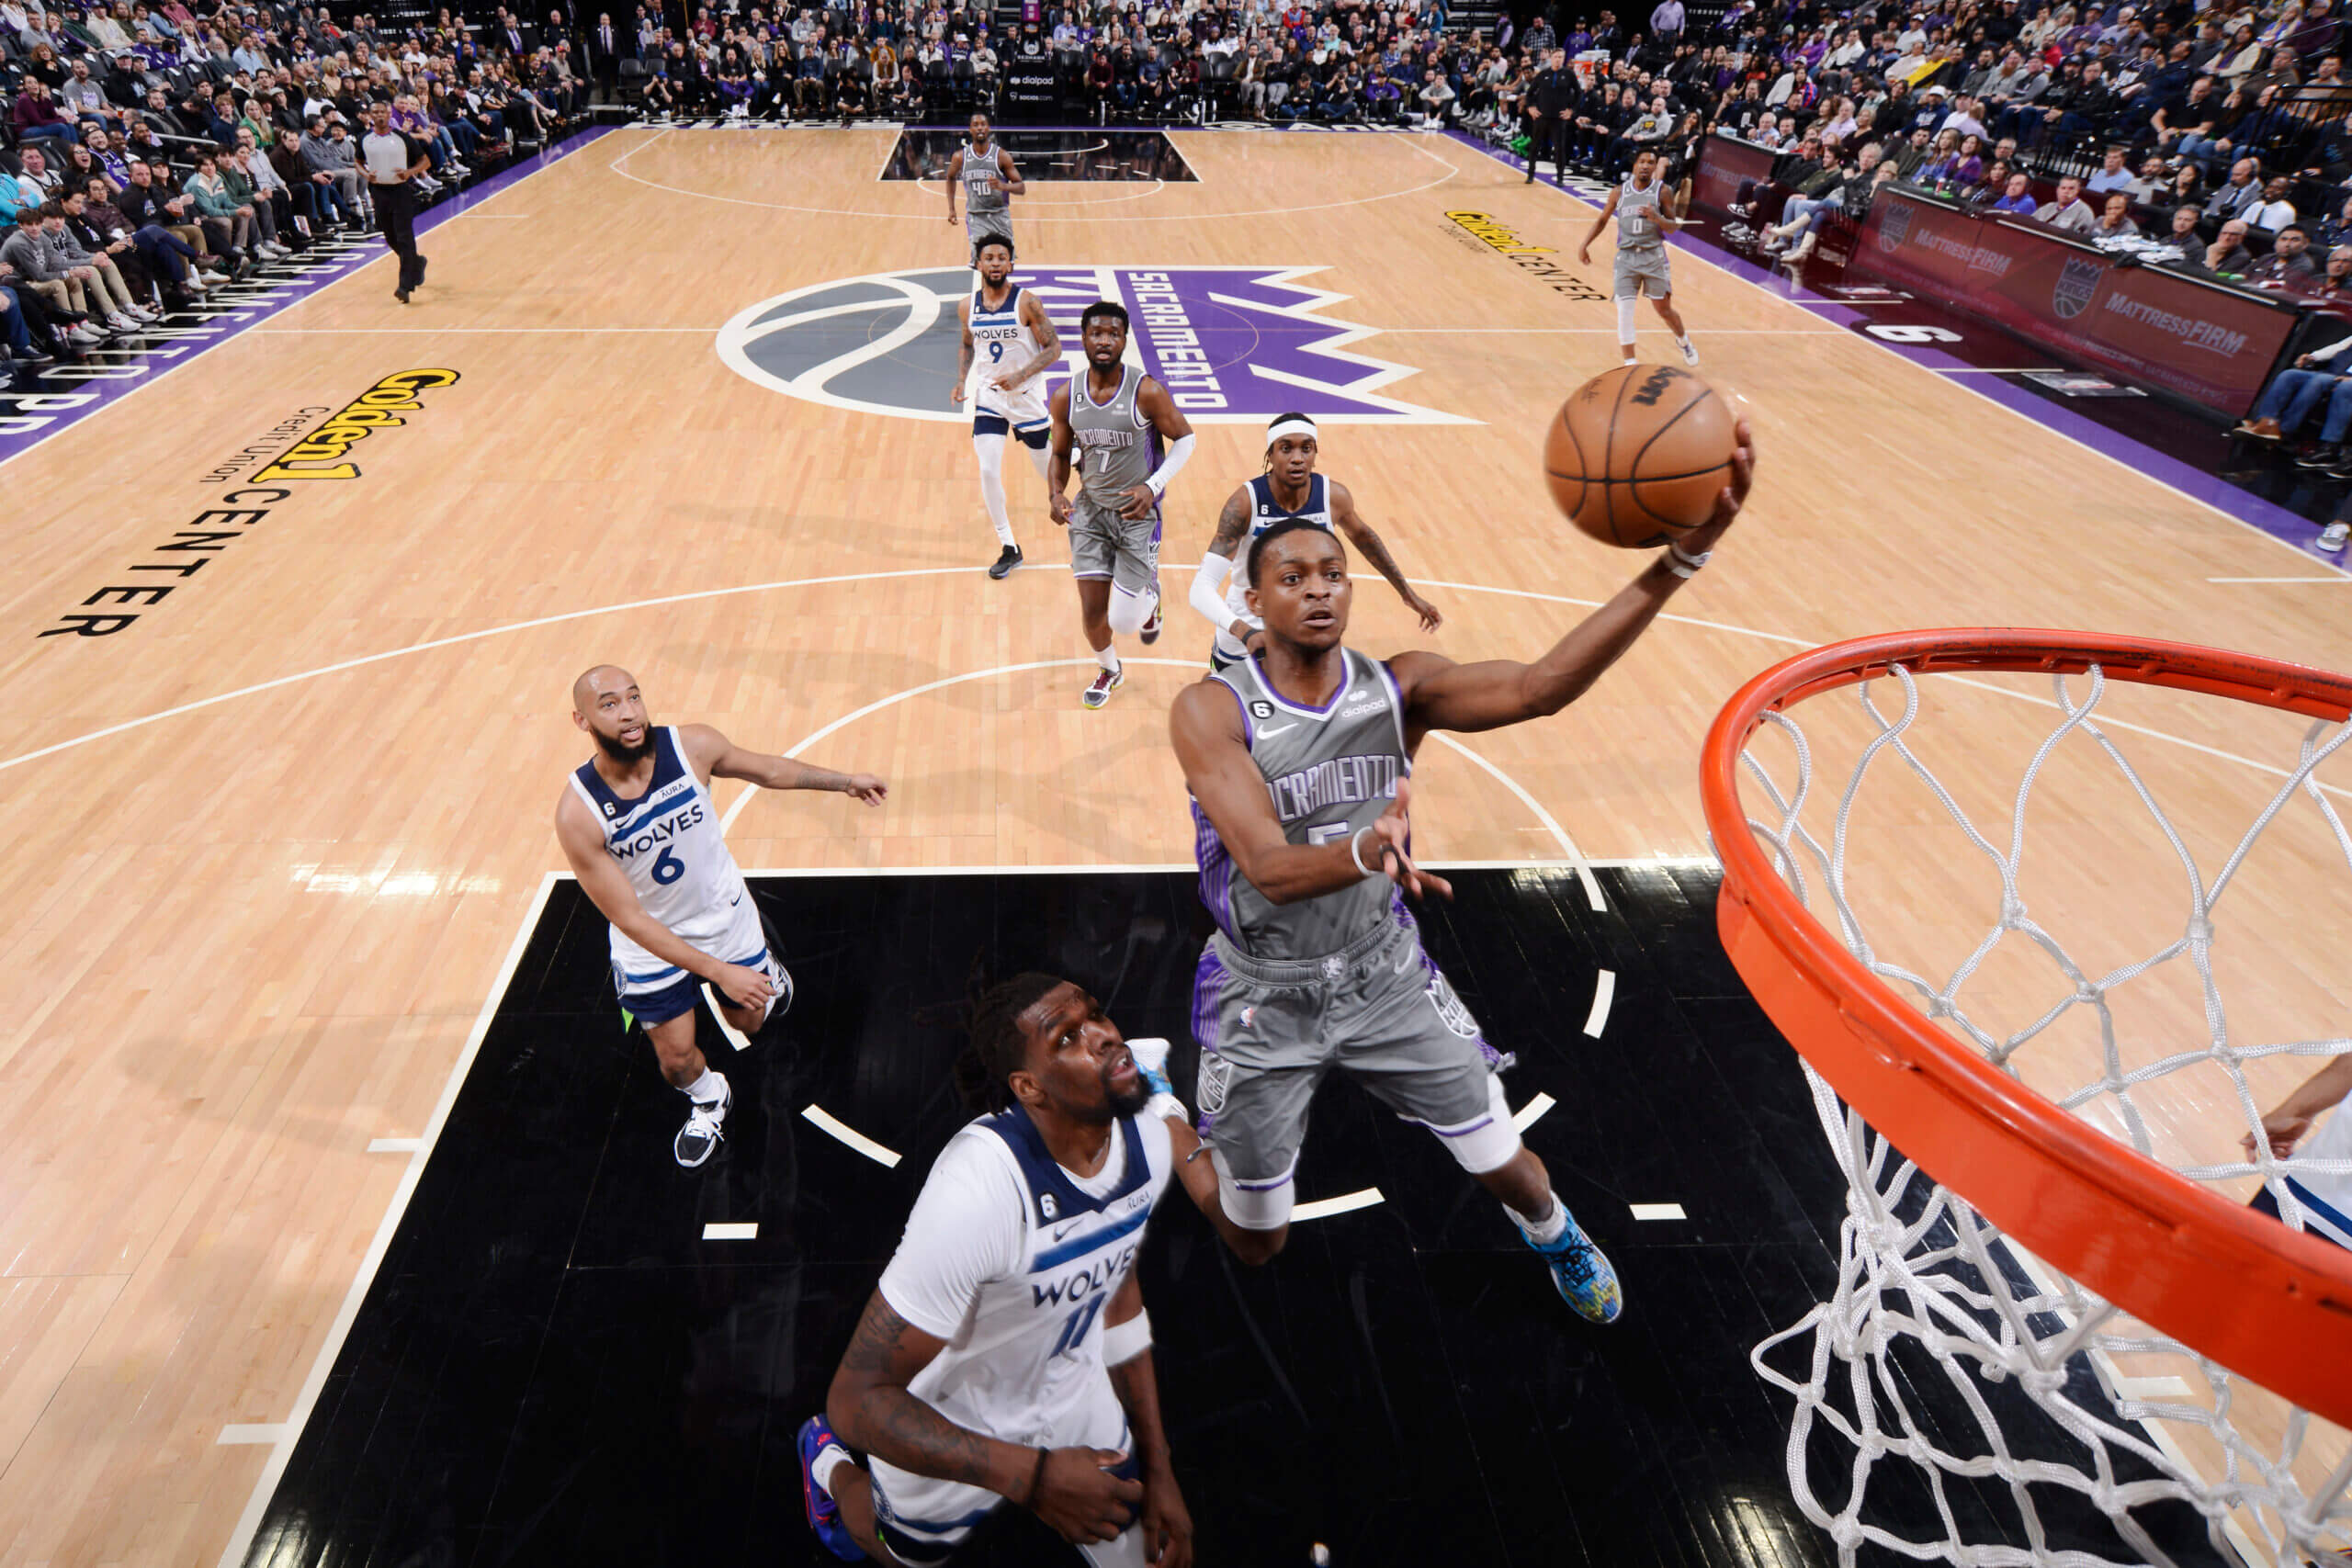 The Sacramento Kings and Minnesota Timberwolves play tonight in the NBA Summer League